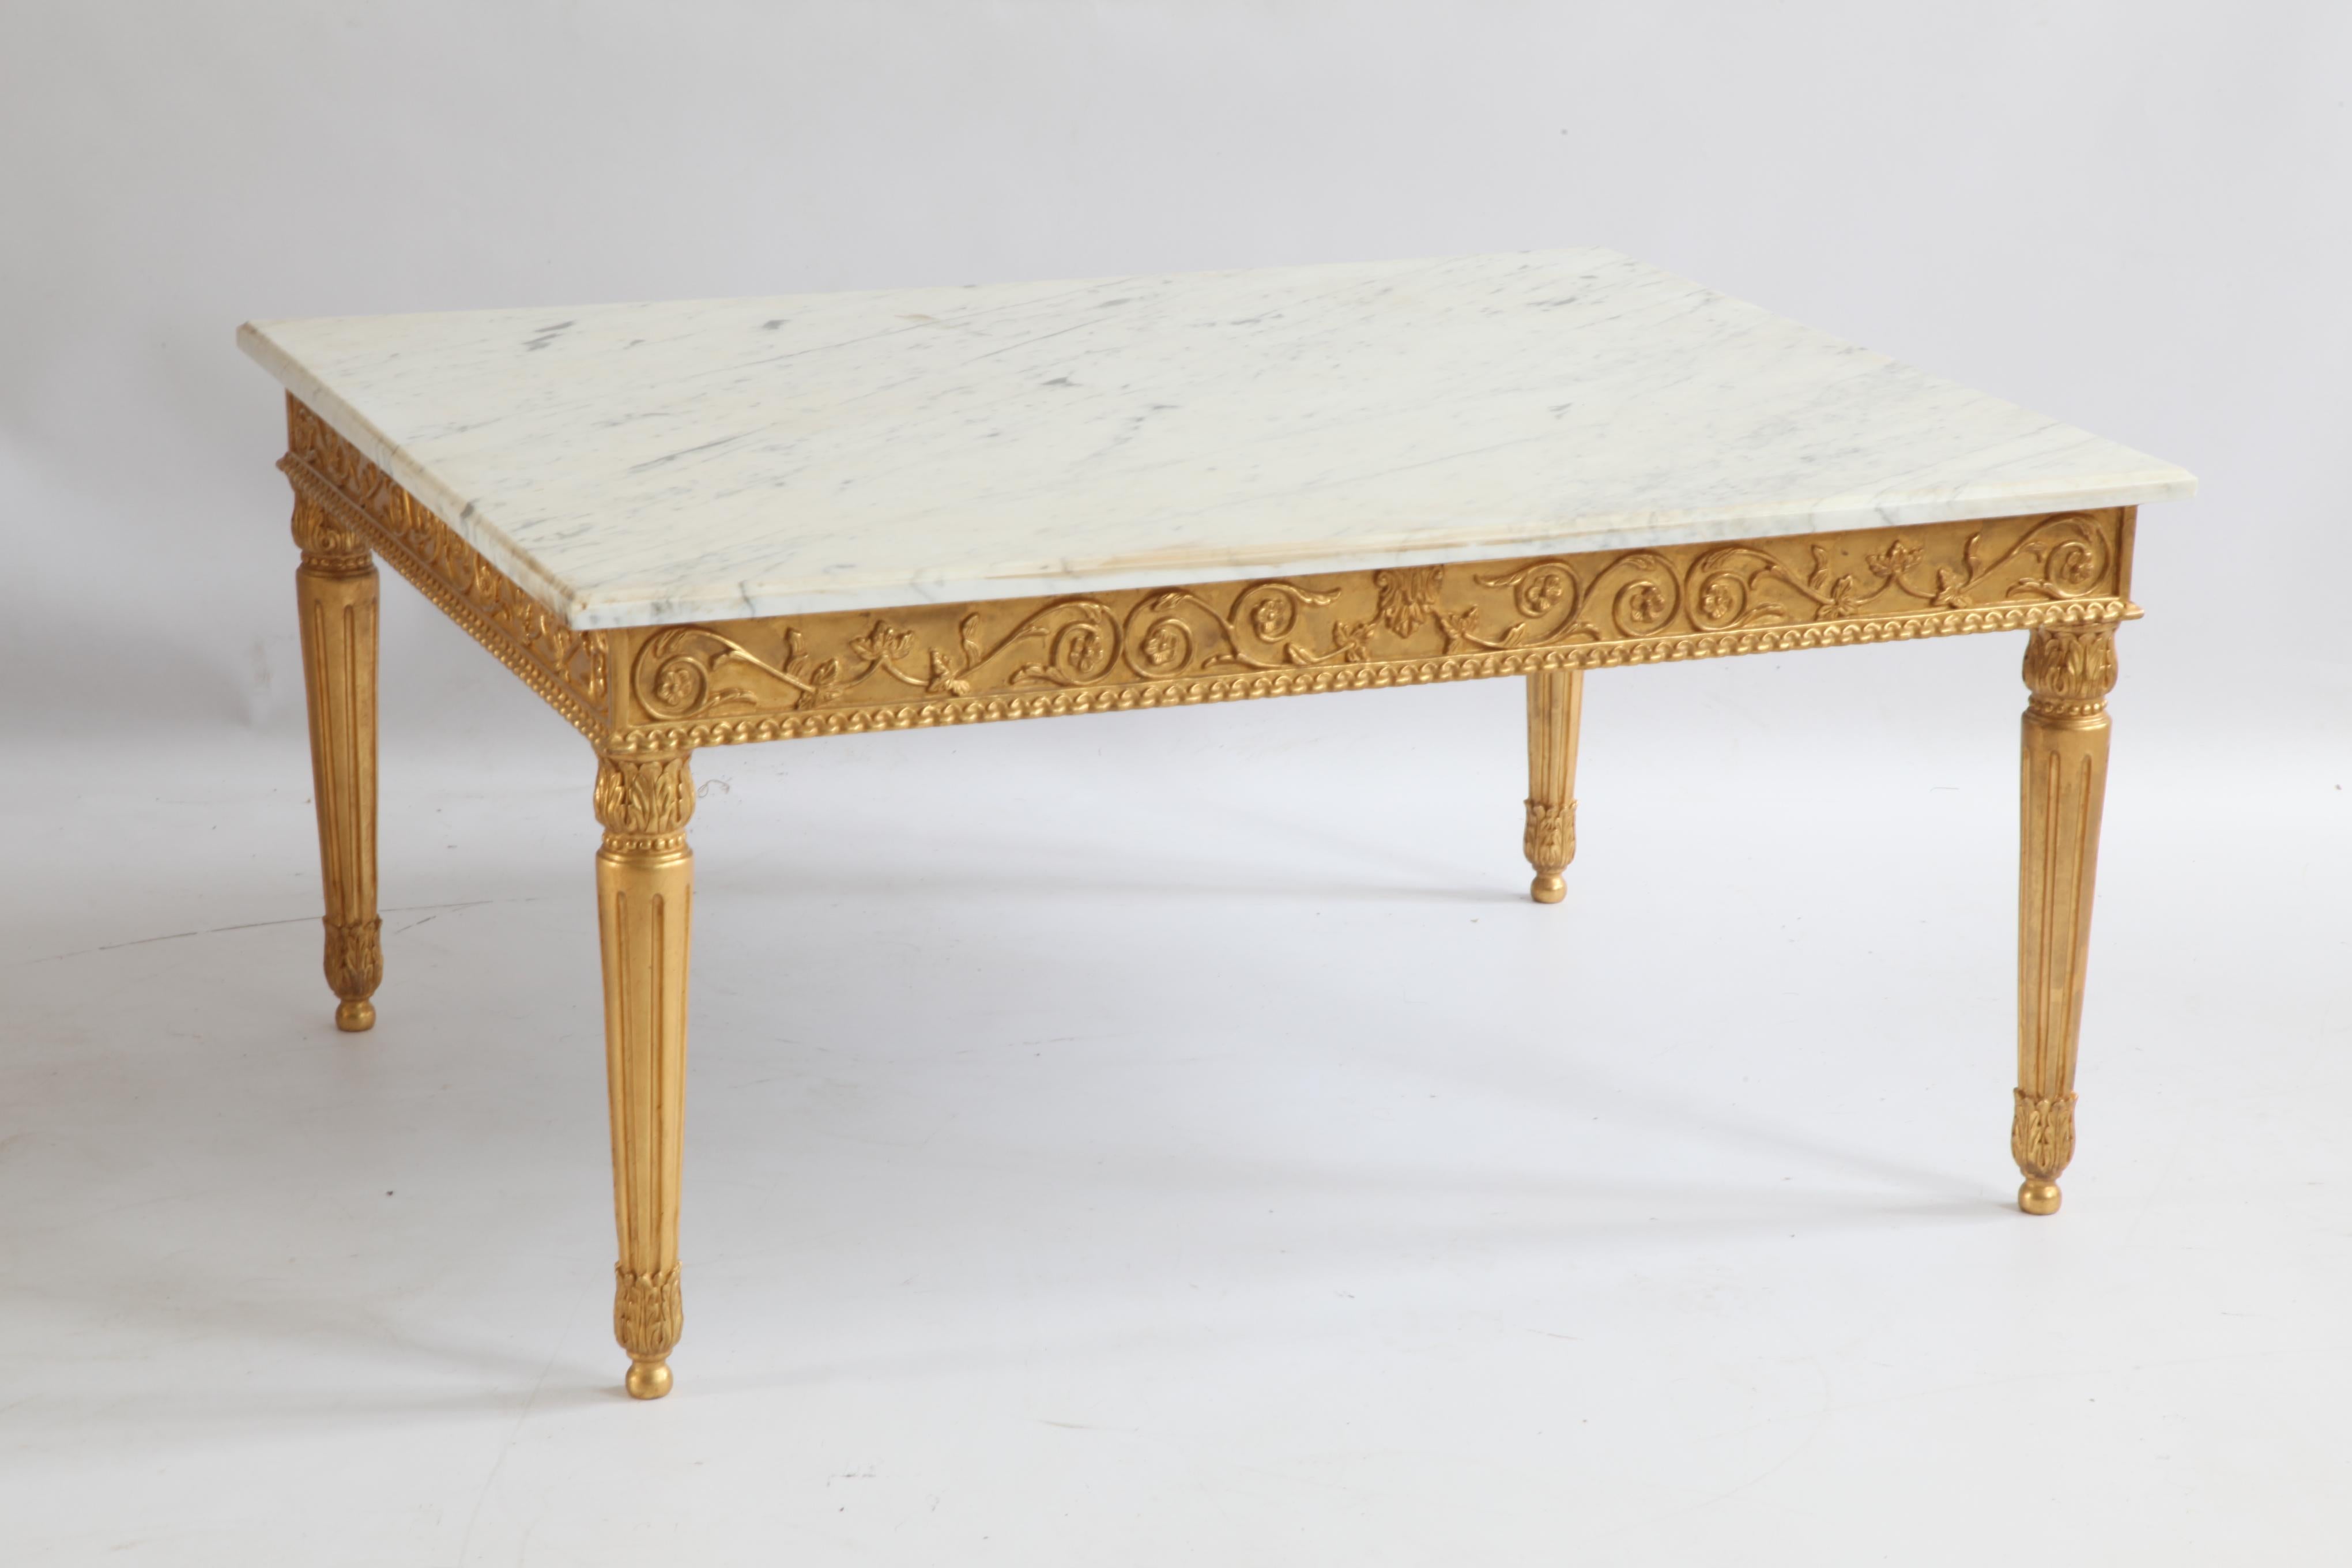 Louis XVI style hand carved coffee table made by La Maison, London. 
A Carrara marble top has been made with bevelled edge on all sides, made by La Maison London.
Gilt finish.